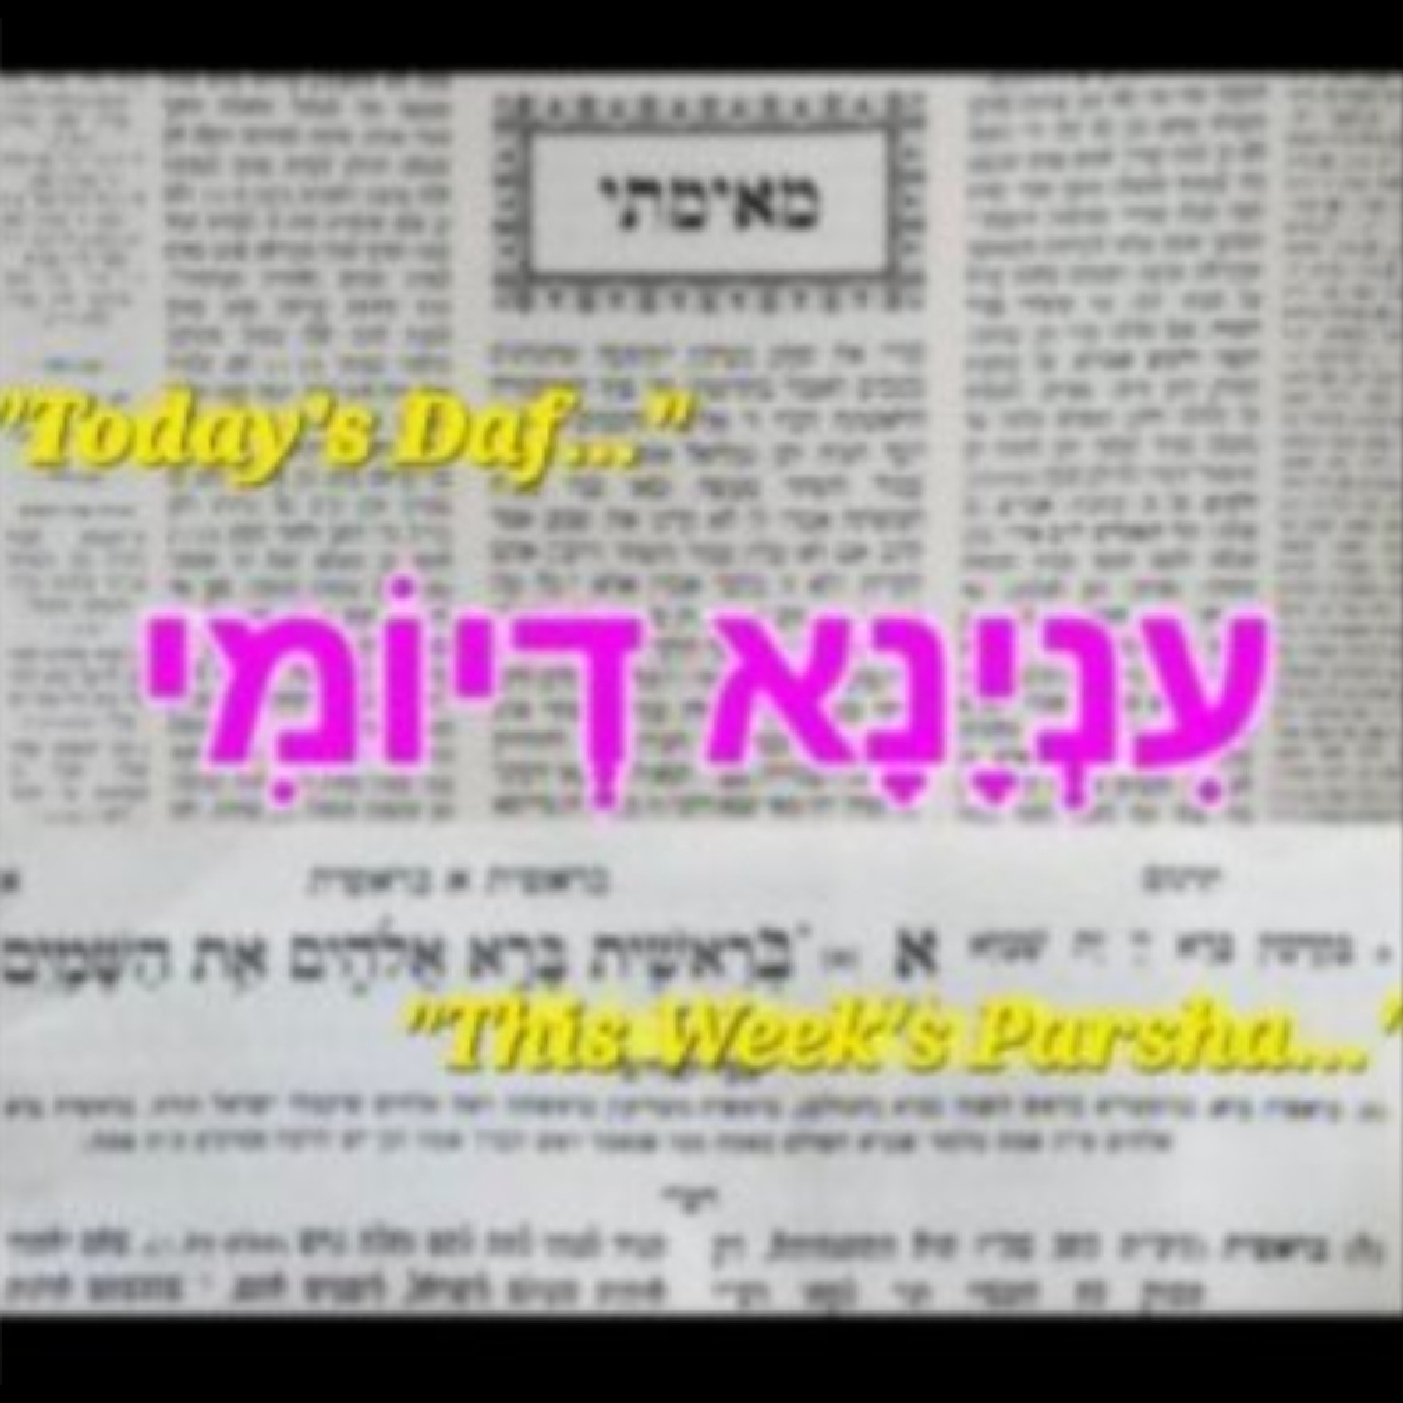 Inyana D'Yomi/עִנְיָנָא דְיוֹמִי - Beshalach & Bava Kama 82: 3 Days Without Torah💧 (Plus some recent shout-outs to Va'Eira and Bo)